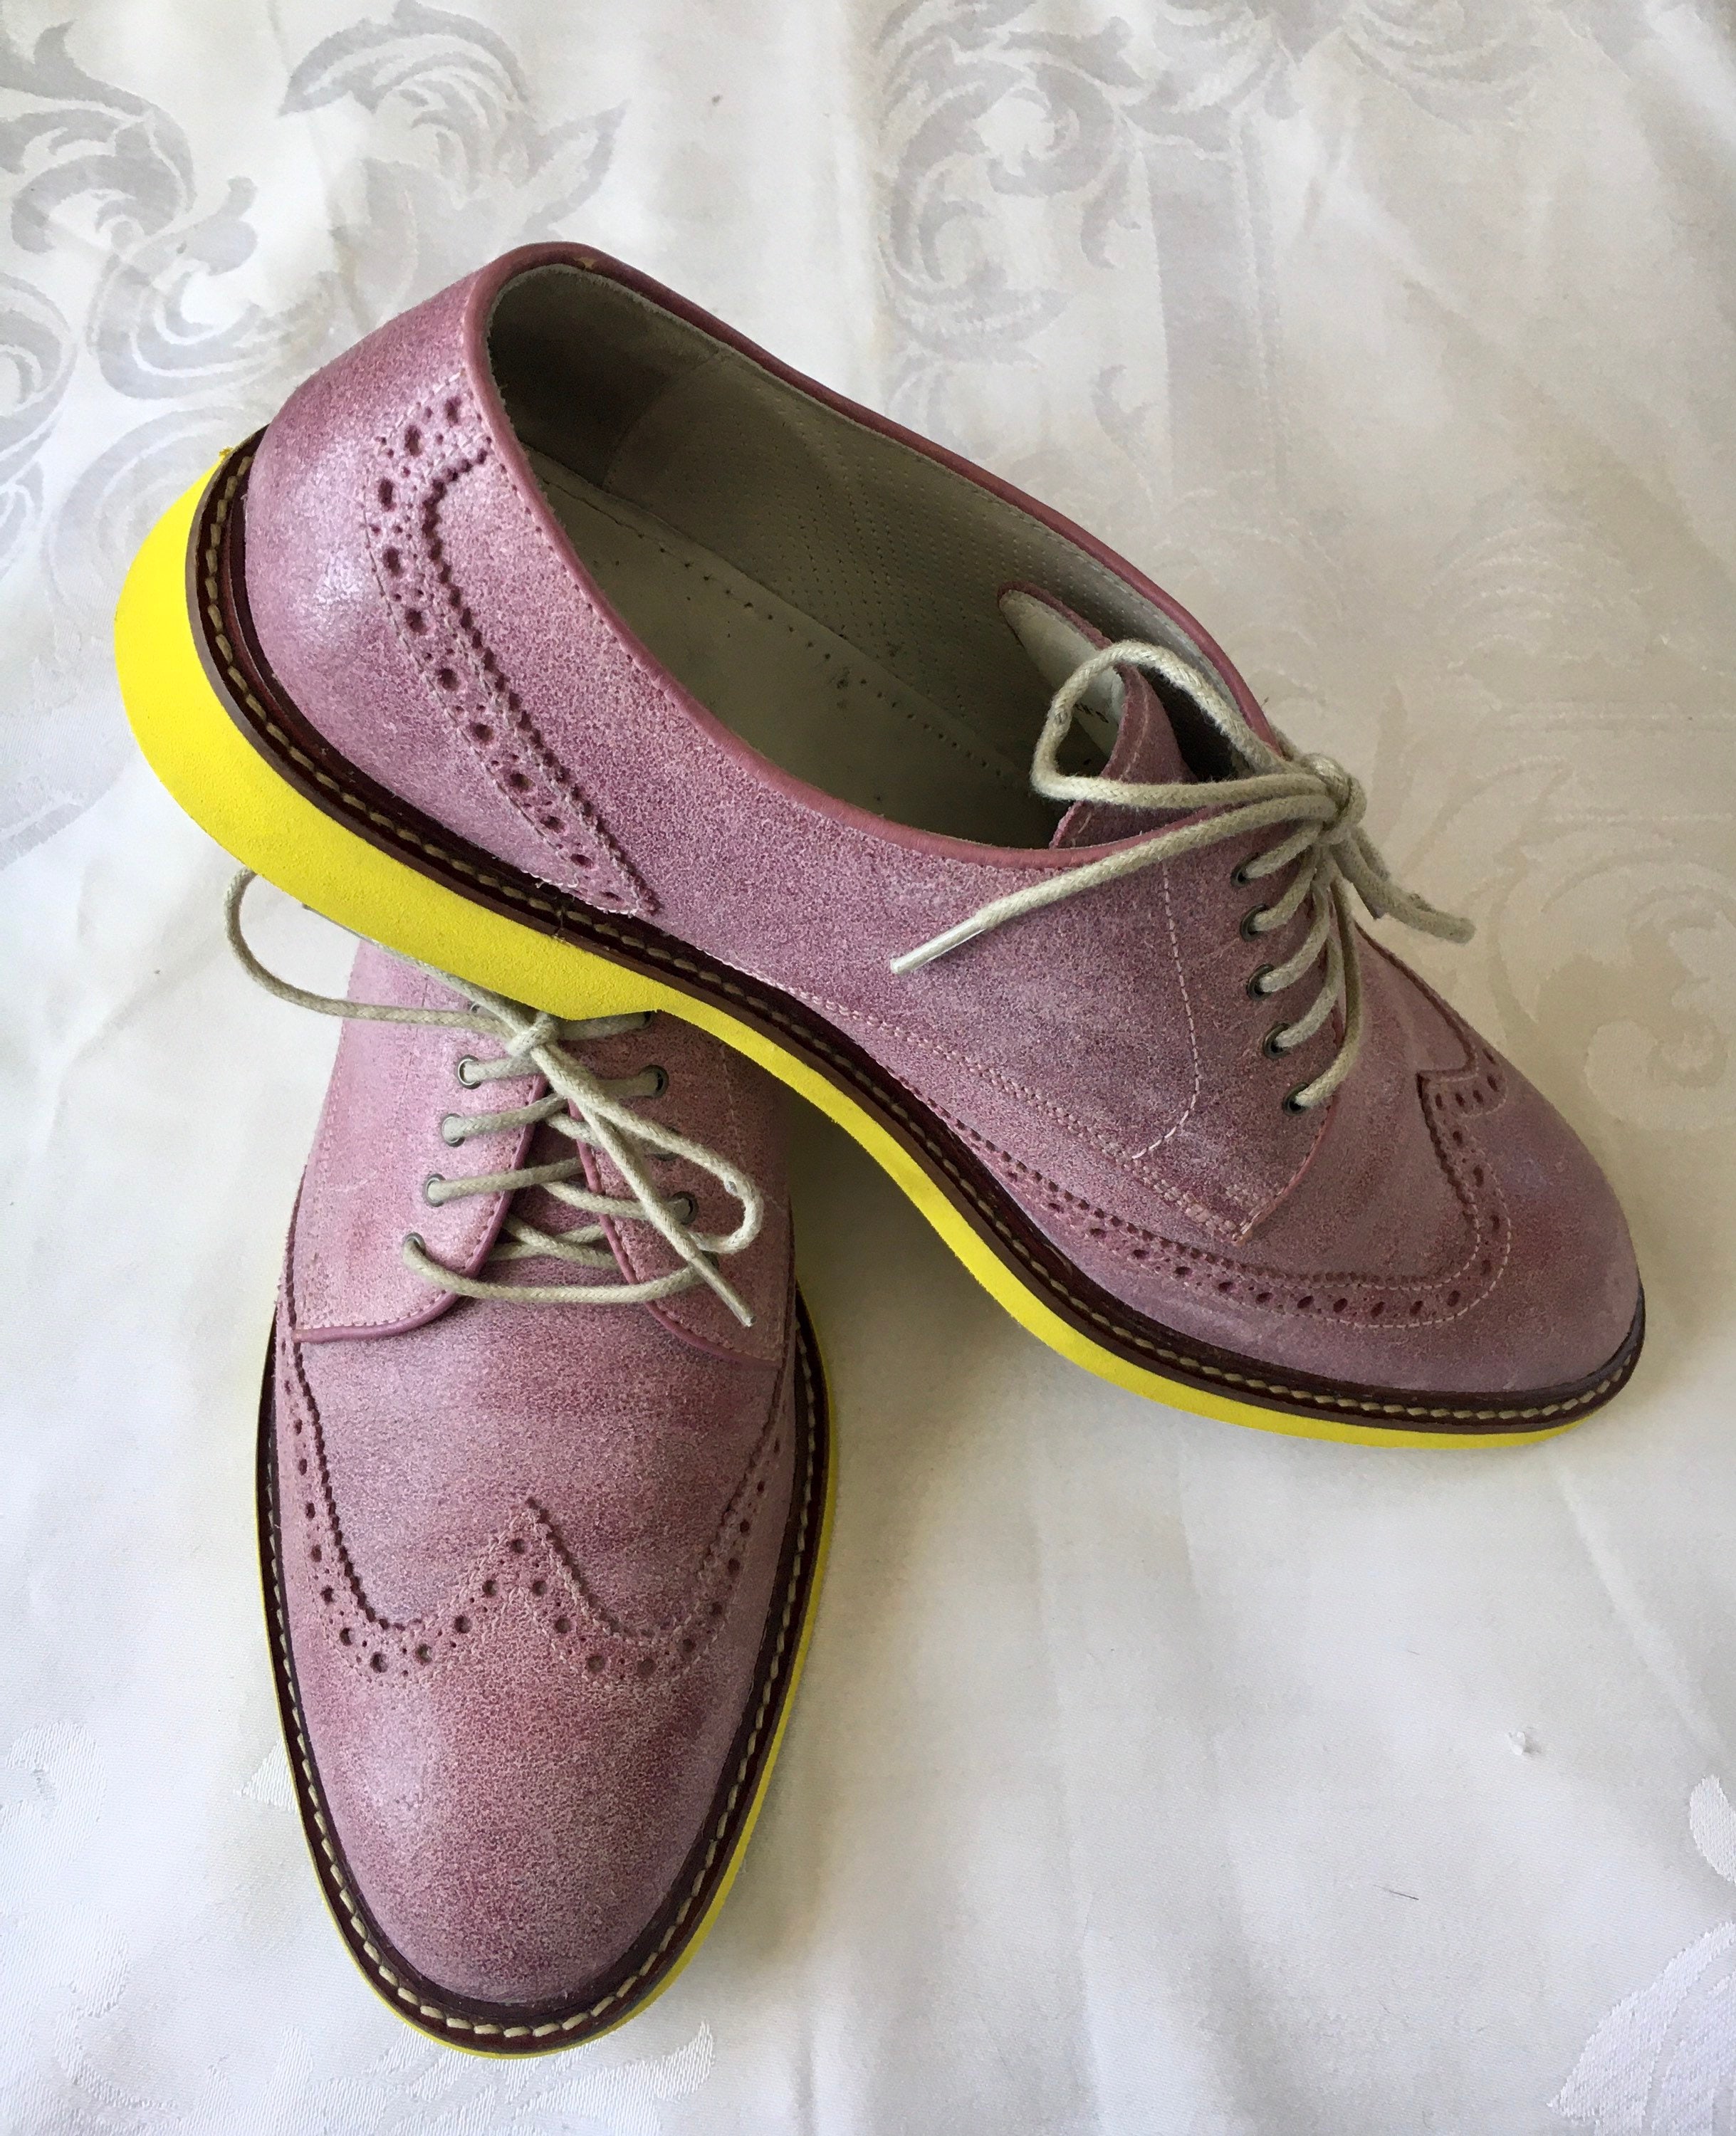 Cole Haan Nike Air Collaboration Lunargrand Wingtip Shoes Canada